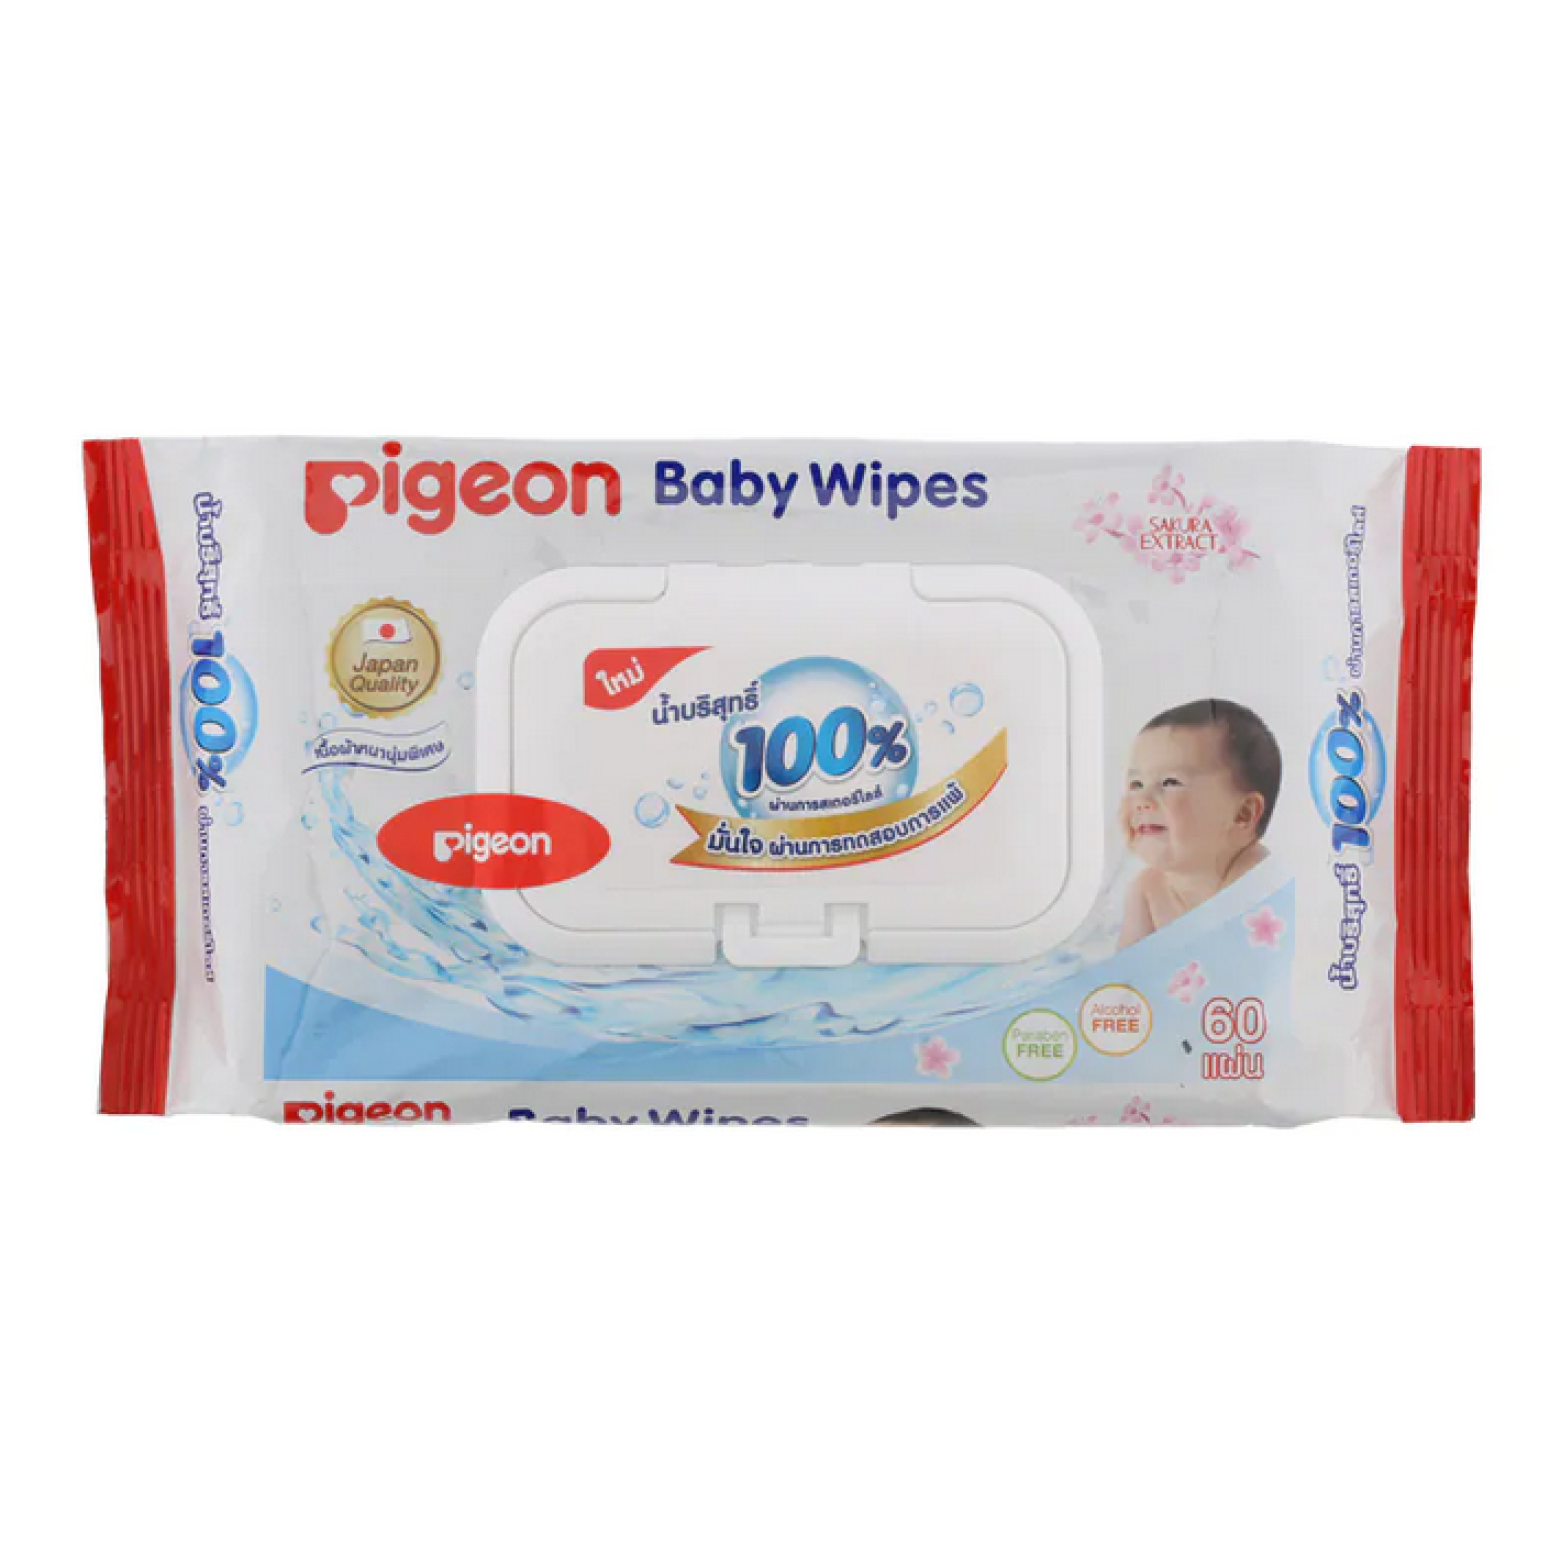 Pigeon Baby Wipes Sterilized 100percent Pure Water with Sakura Extract 20sheets